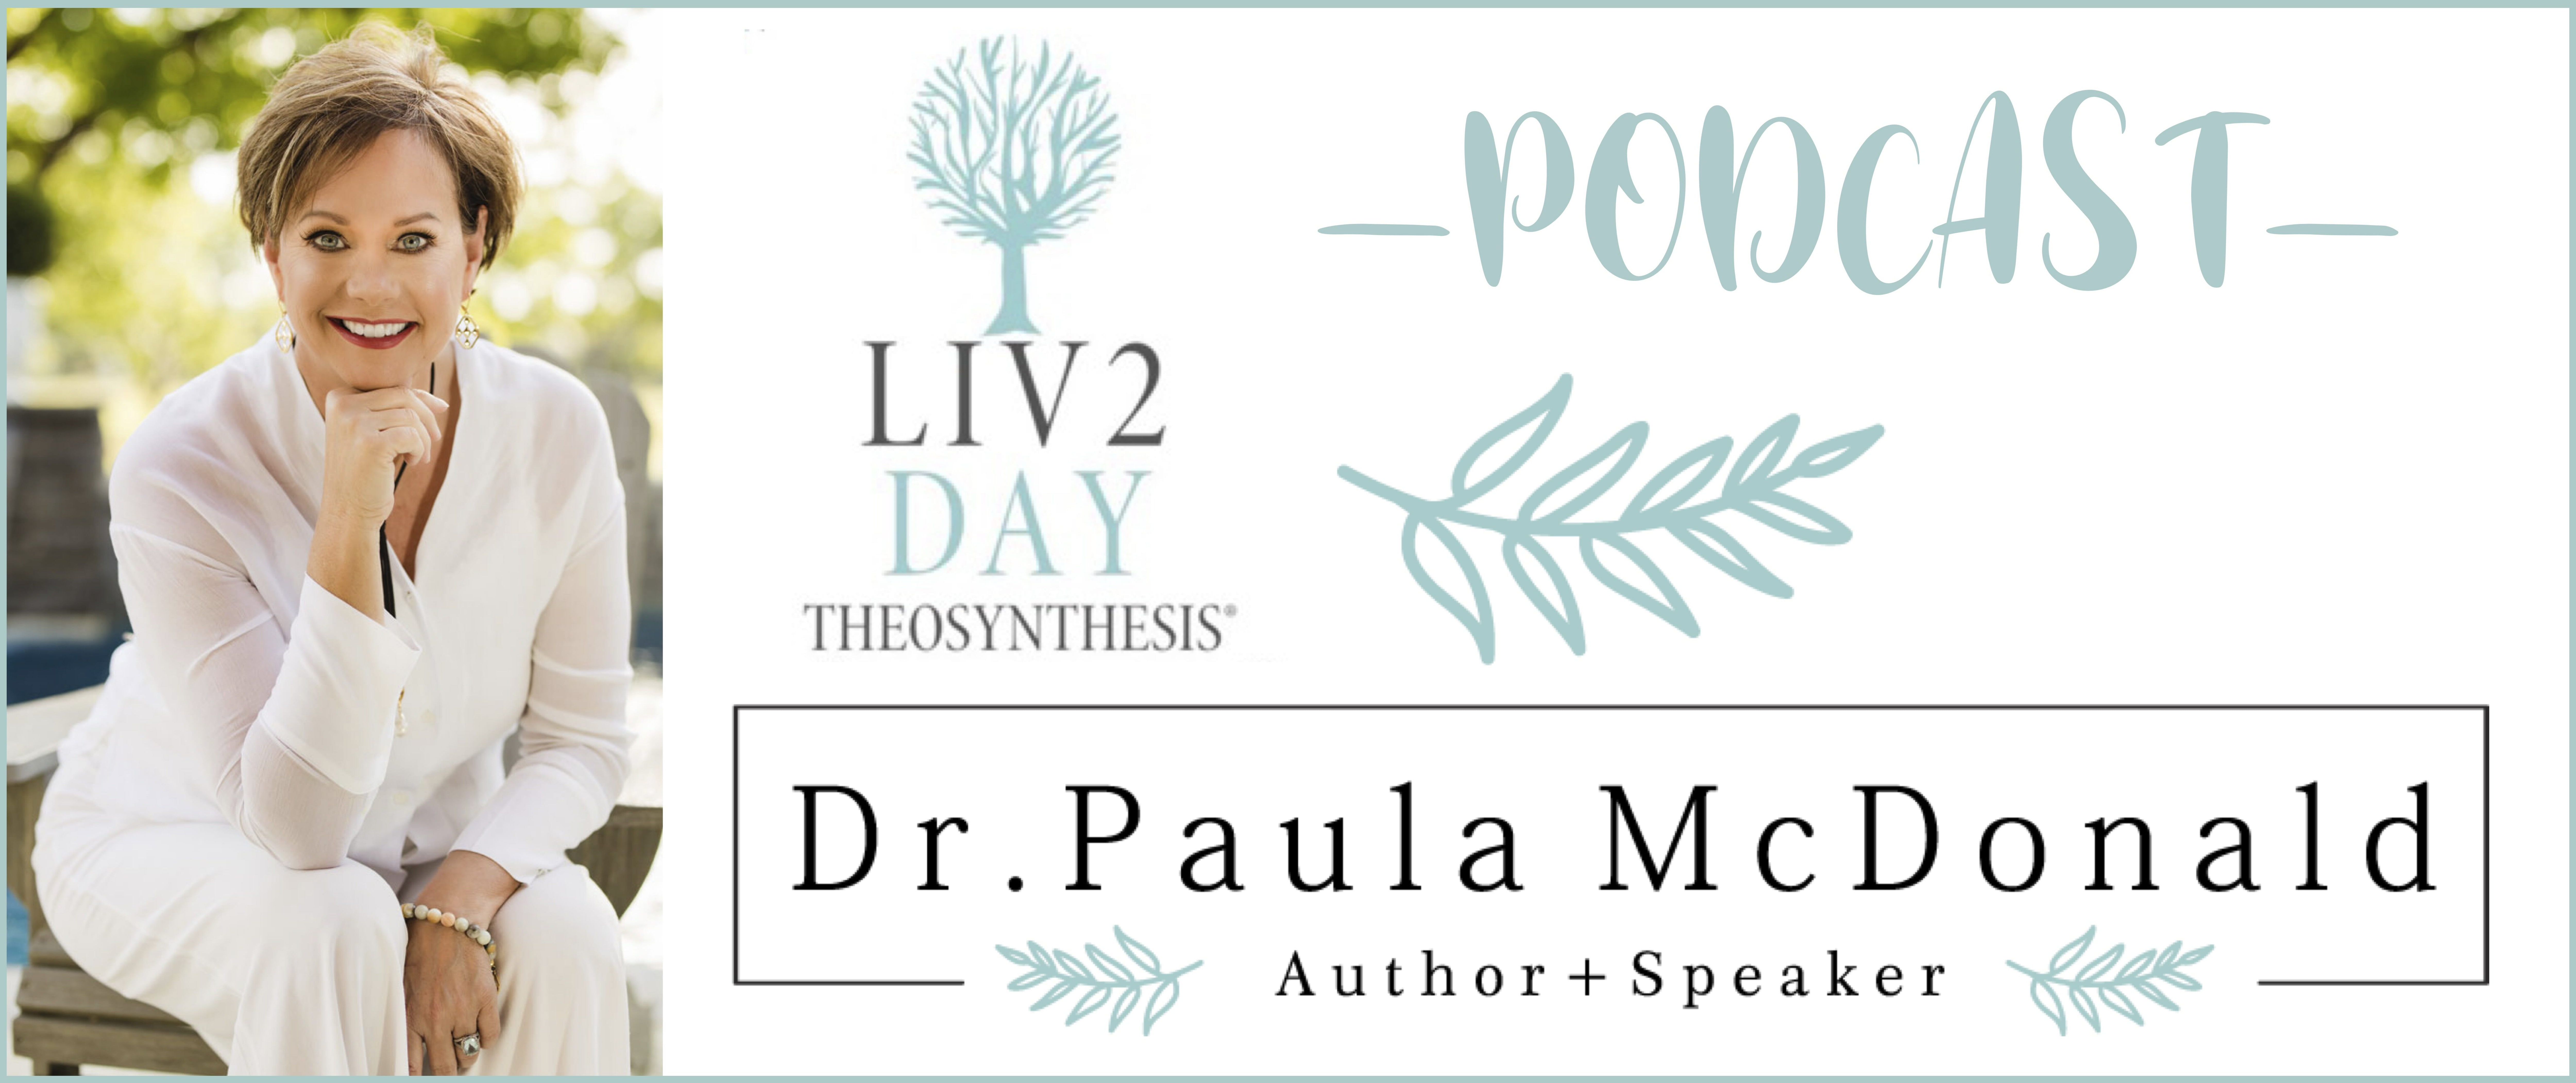 LIV2DAY: Toxins to Avoid